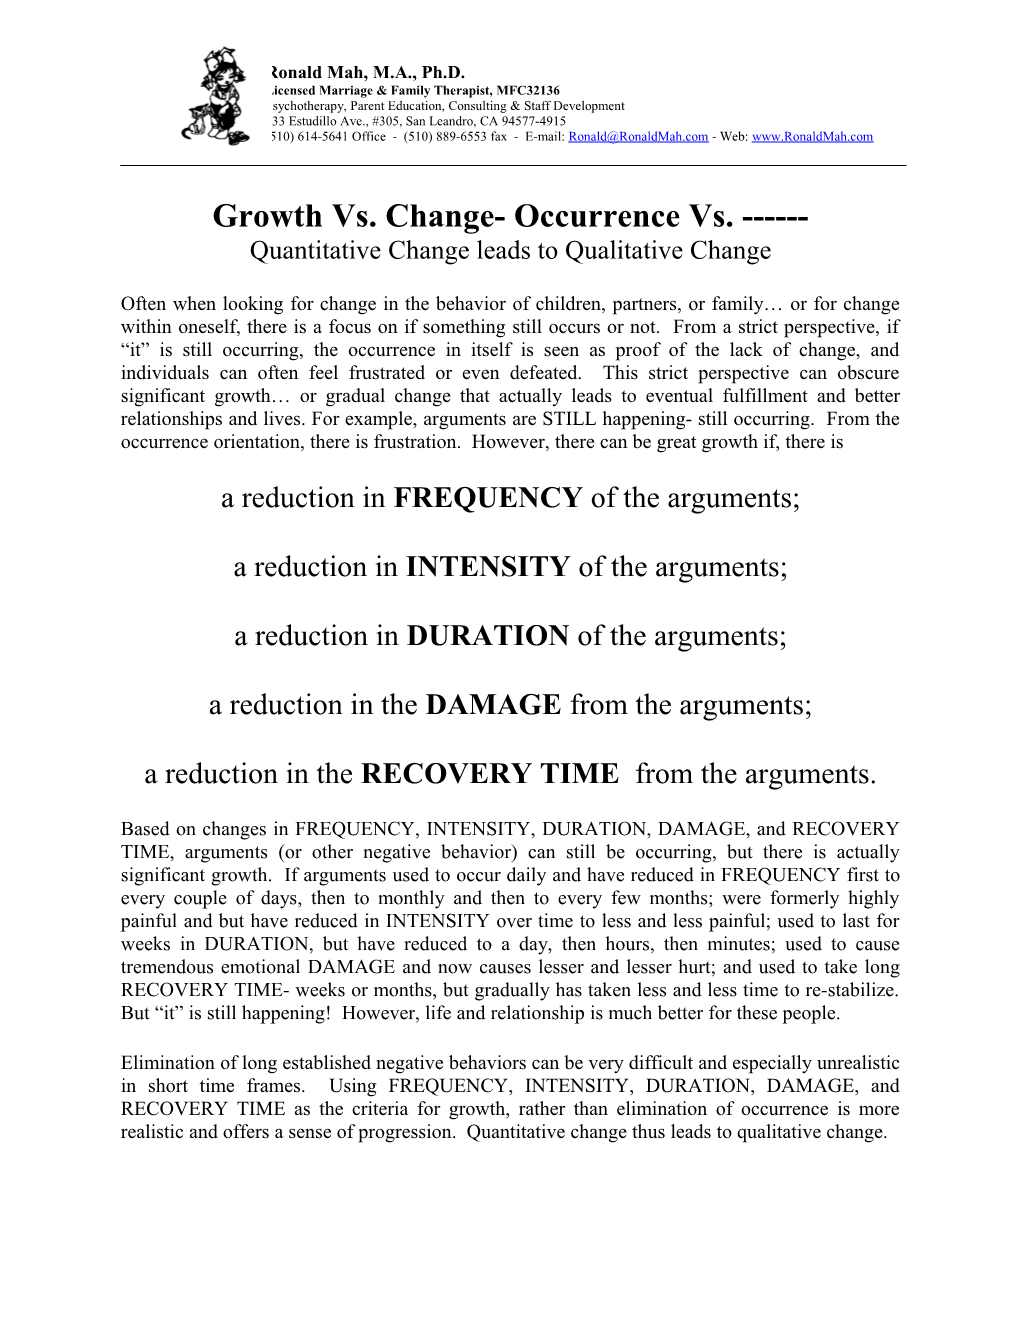 Growth Vs. Change- Occurrence Vs